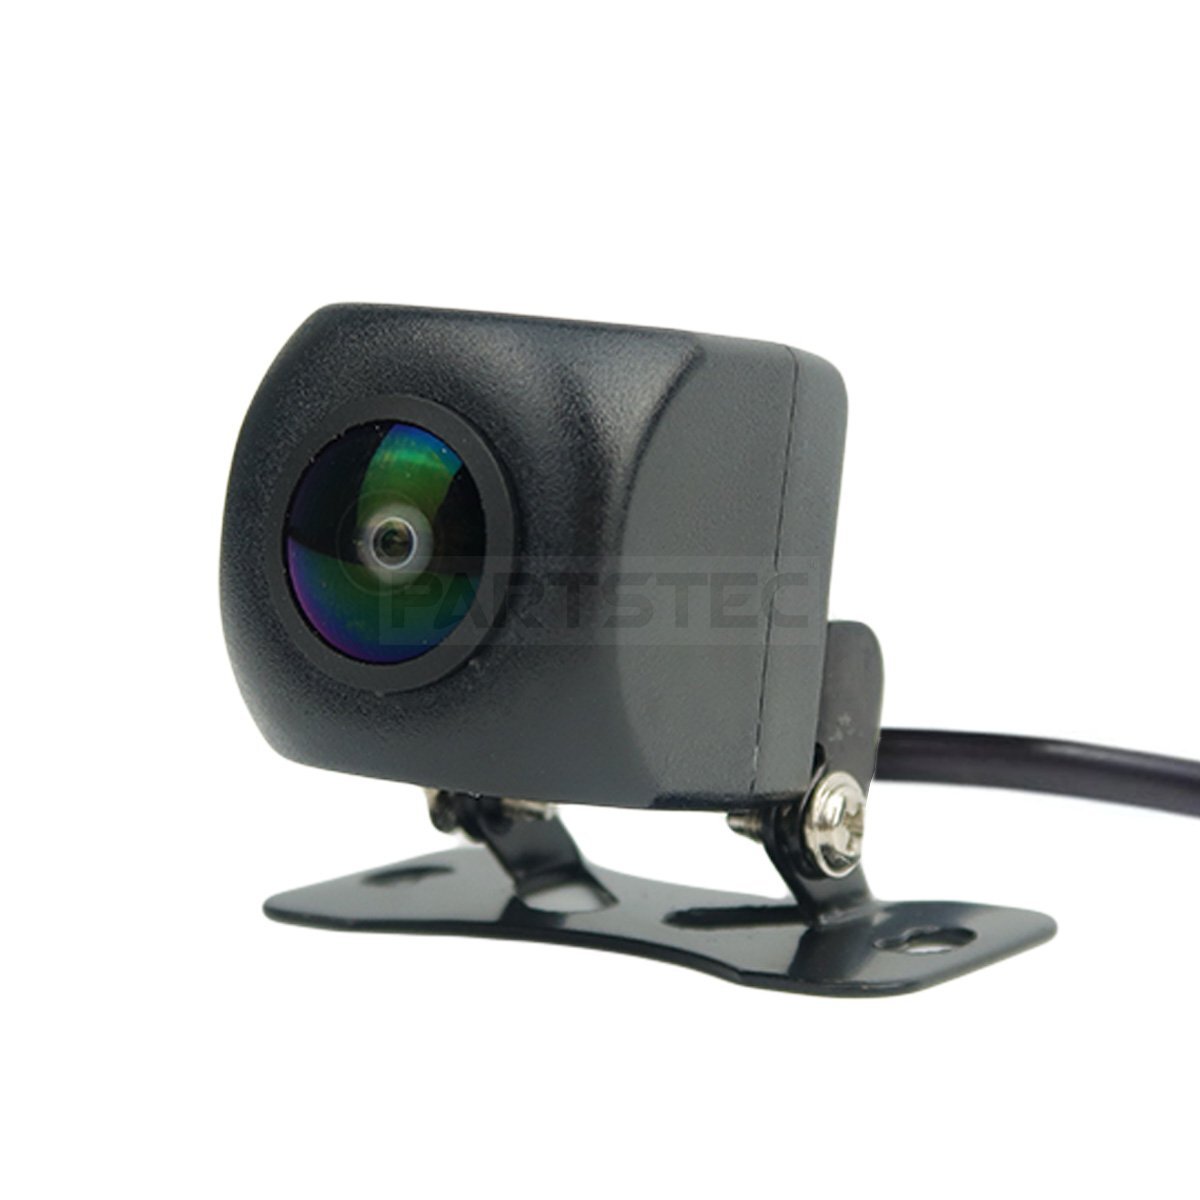 12V back camera 100 ten thousand pixels small size rear camera high resolution guideline equipped / none regular mirror / mirror image black / 9-17